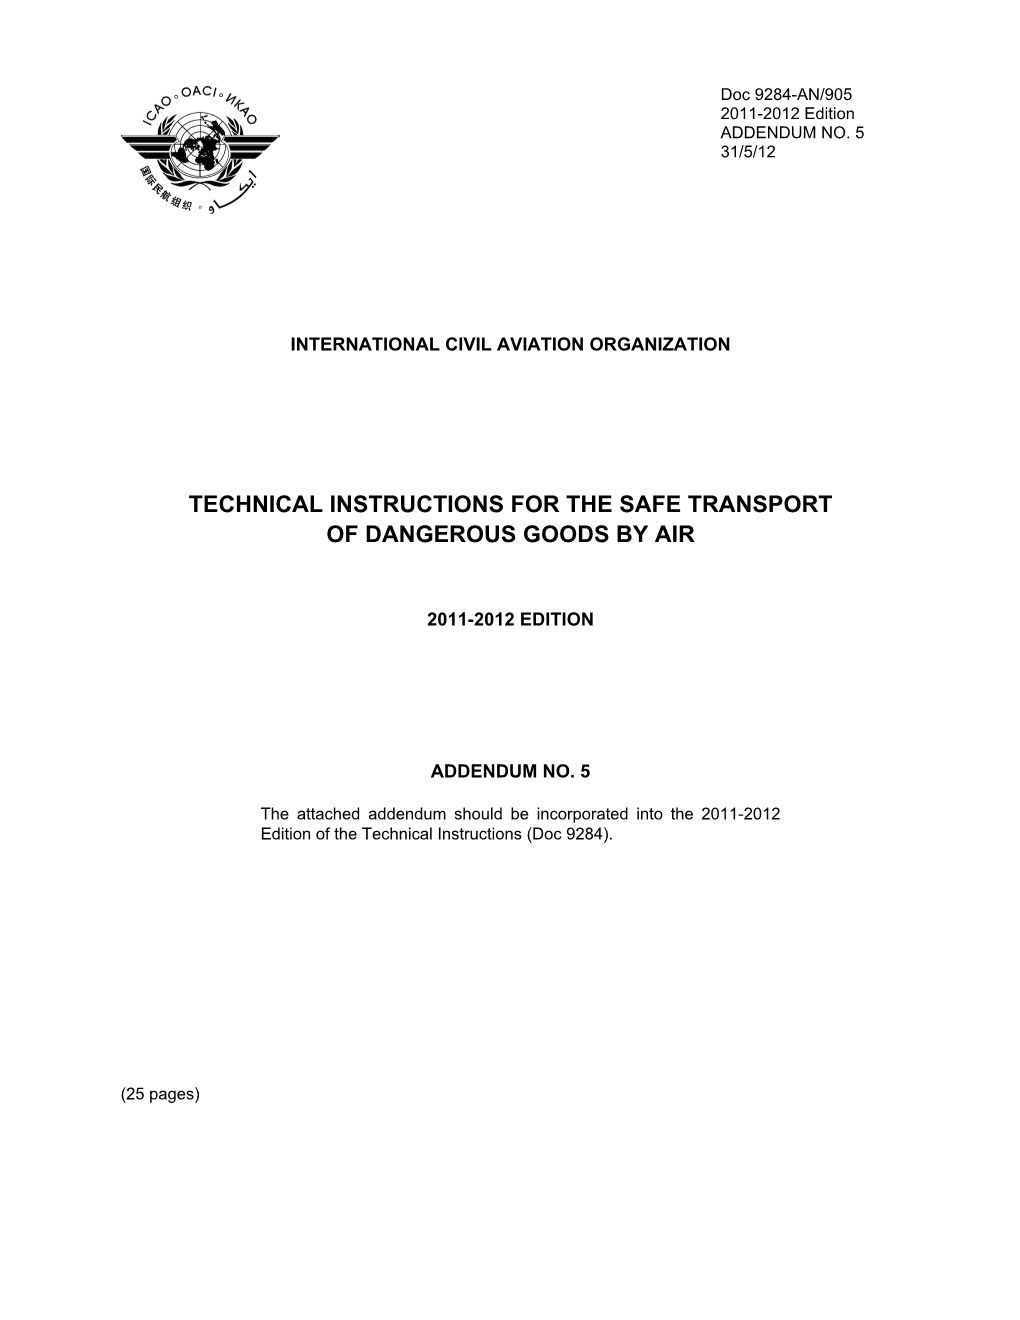 Technical Instructions for the Safe Transport of Dangerous Goods by Air